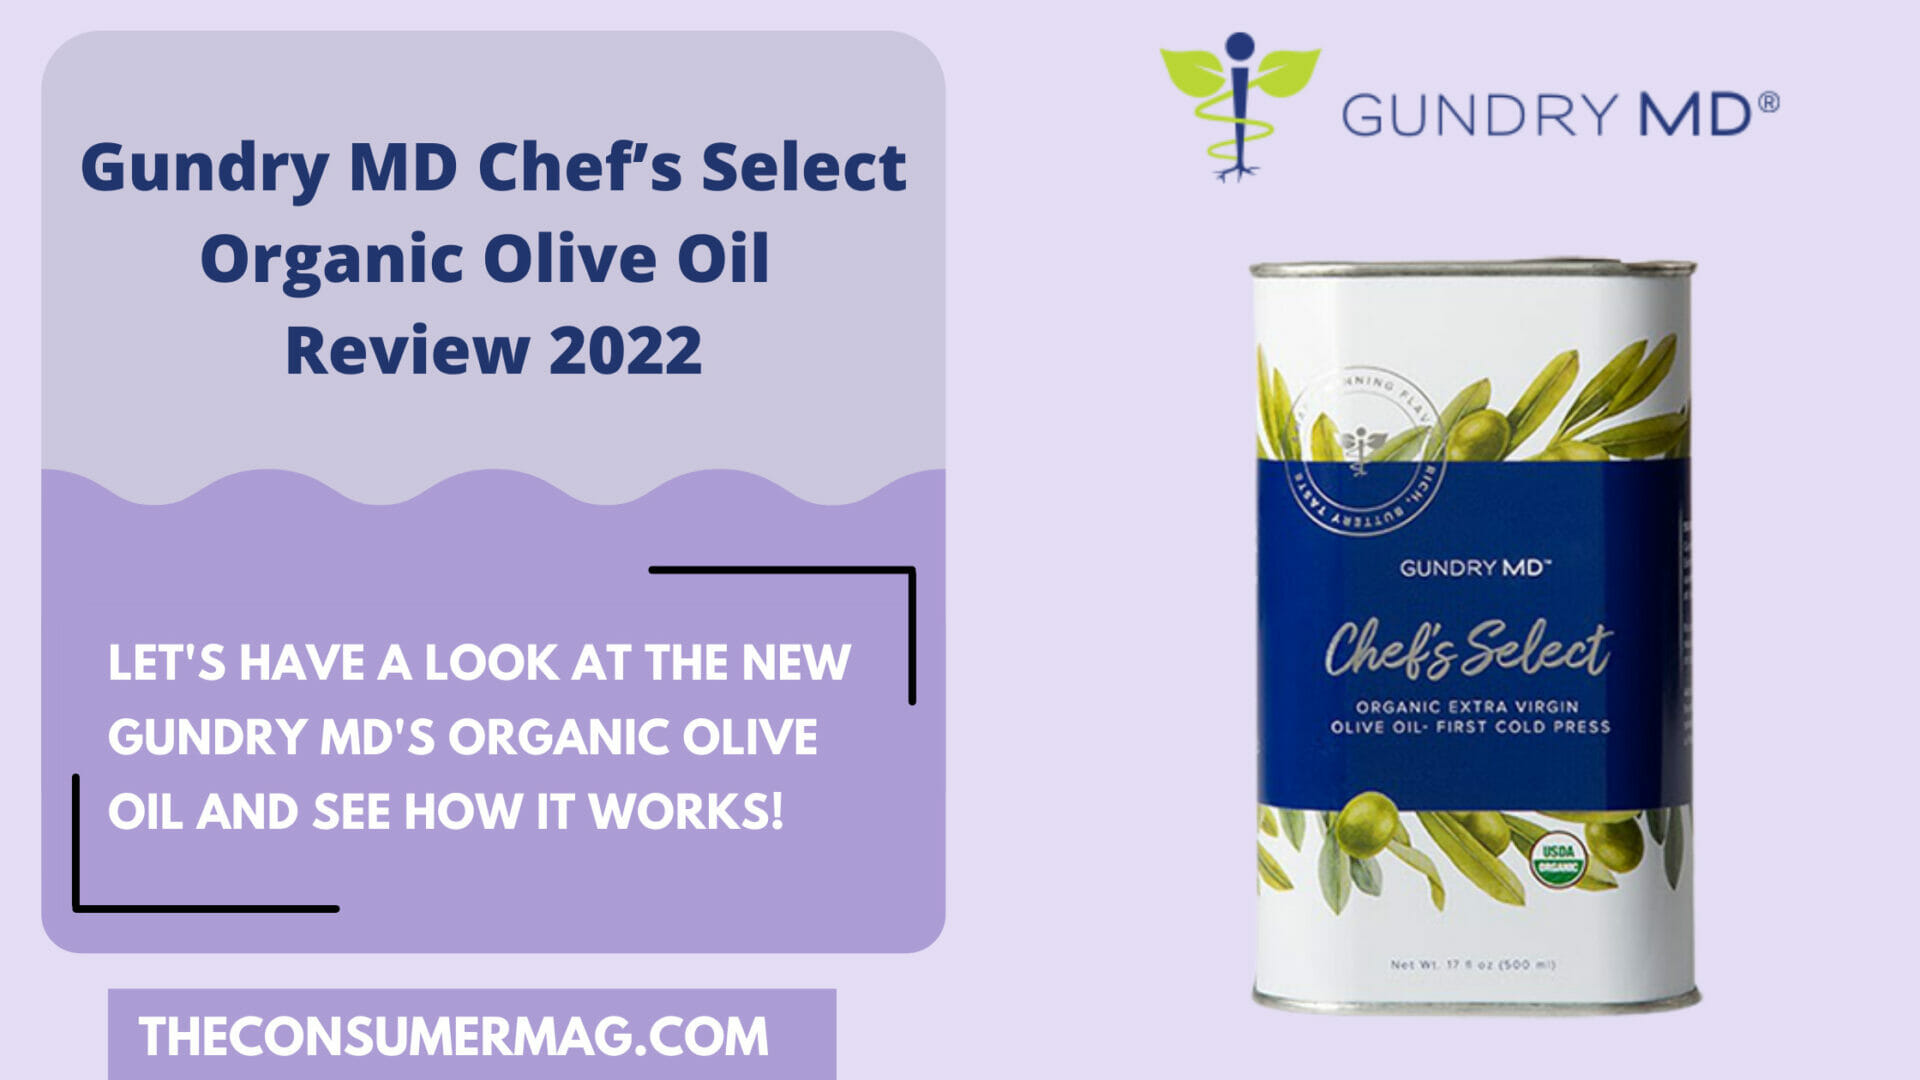 Gundry MD Chef’s Select Organic Olive Oil